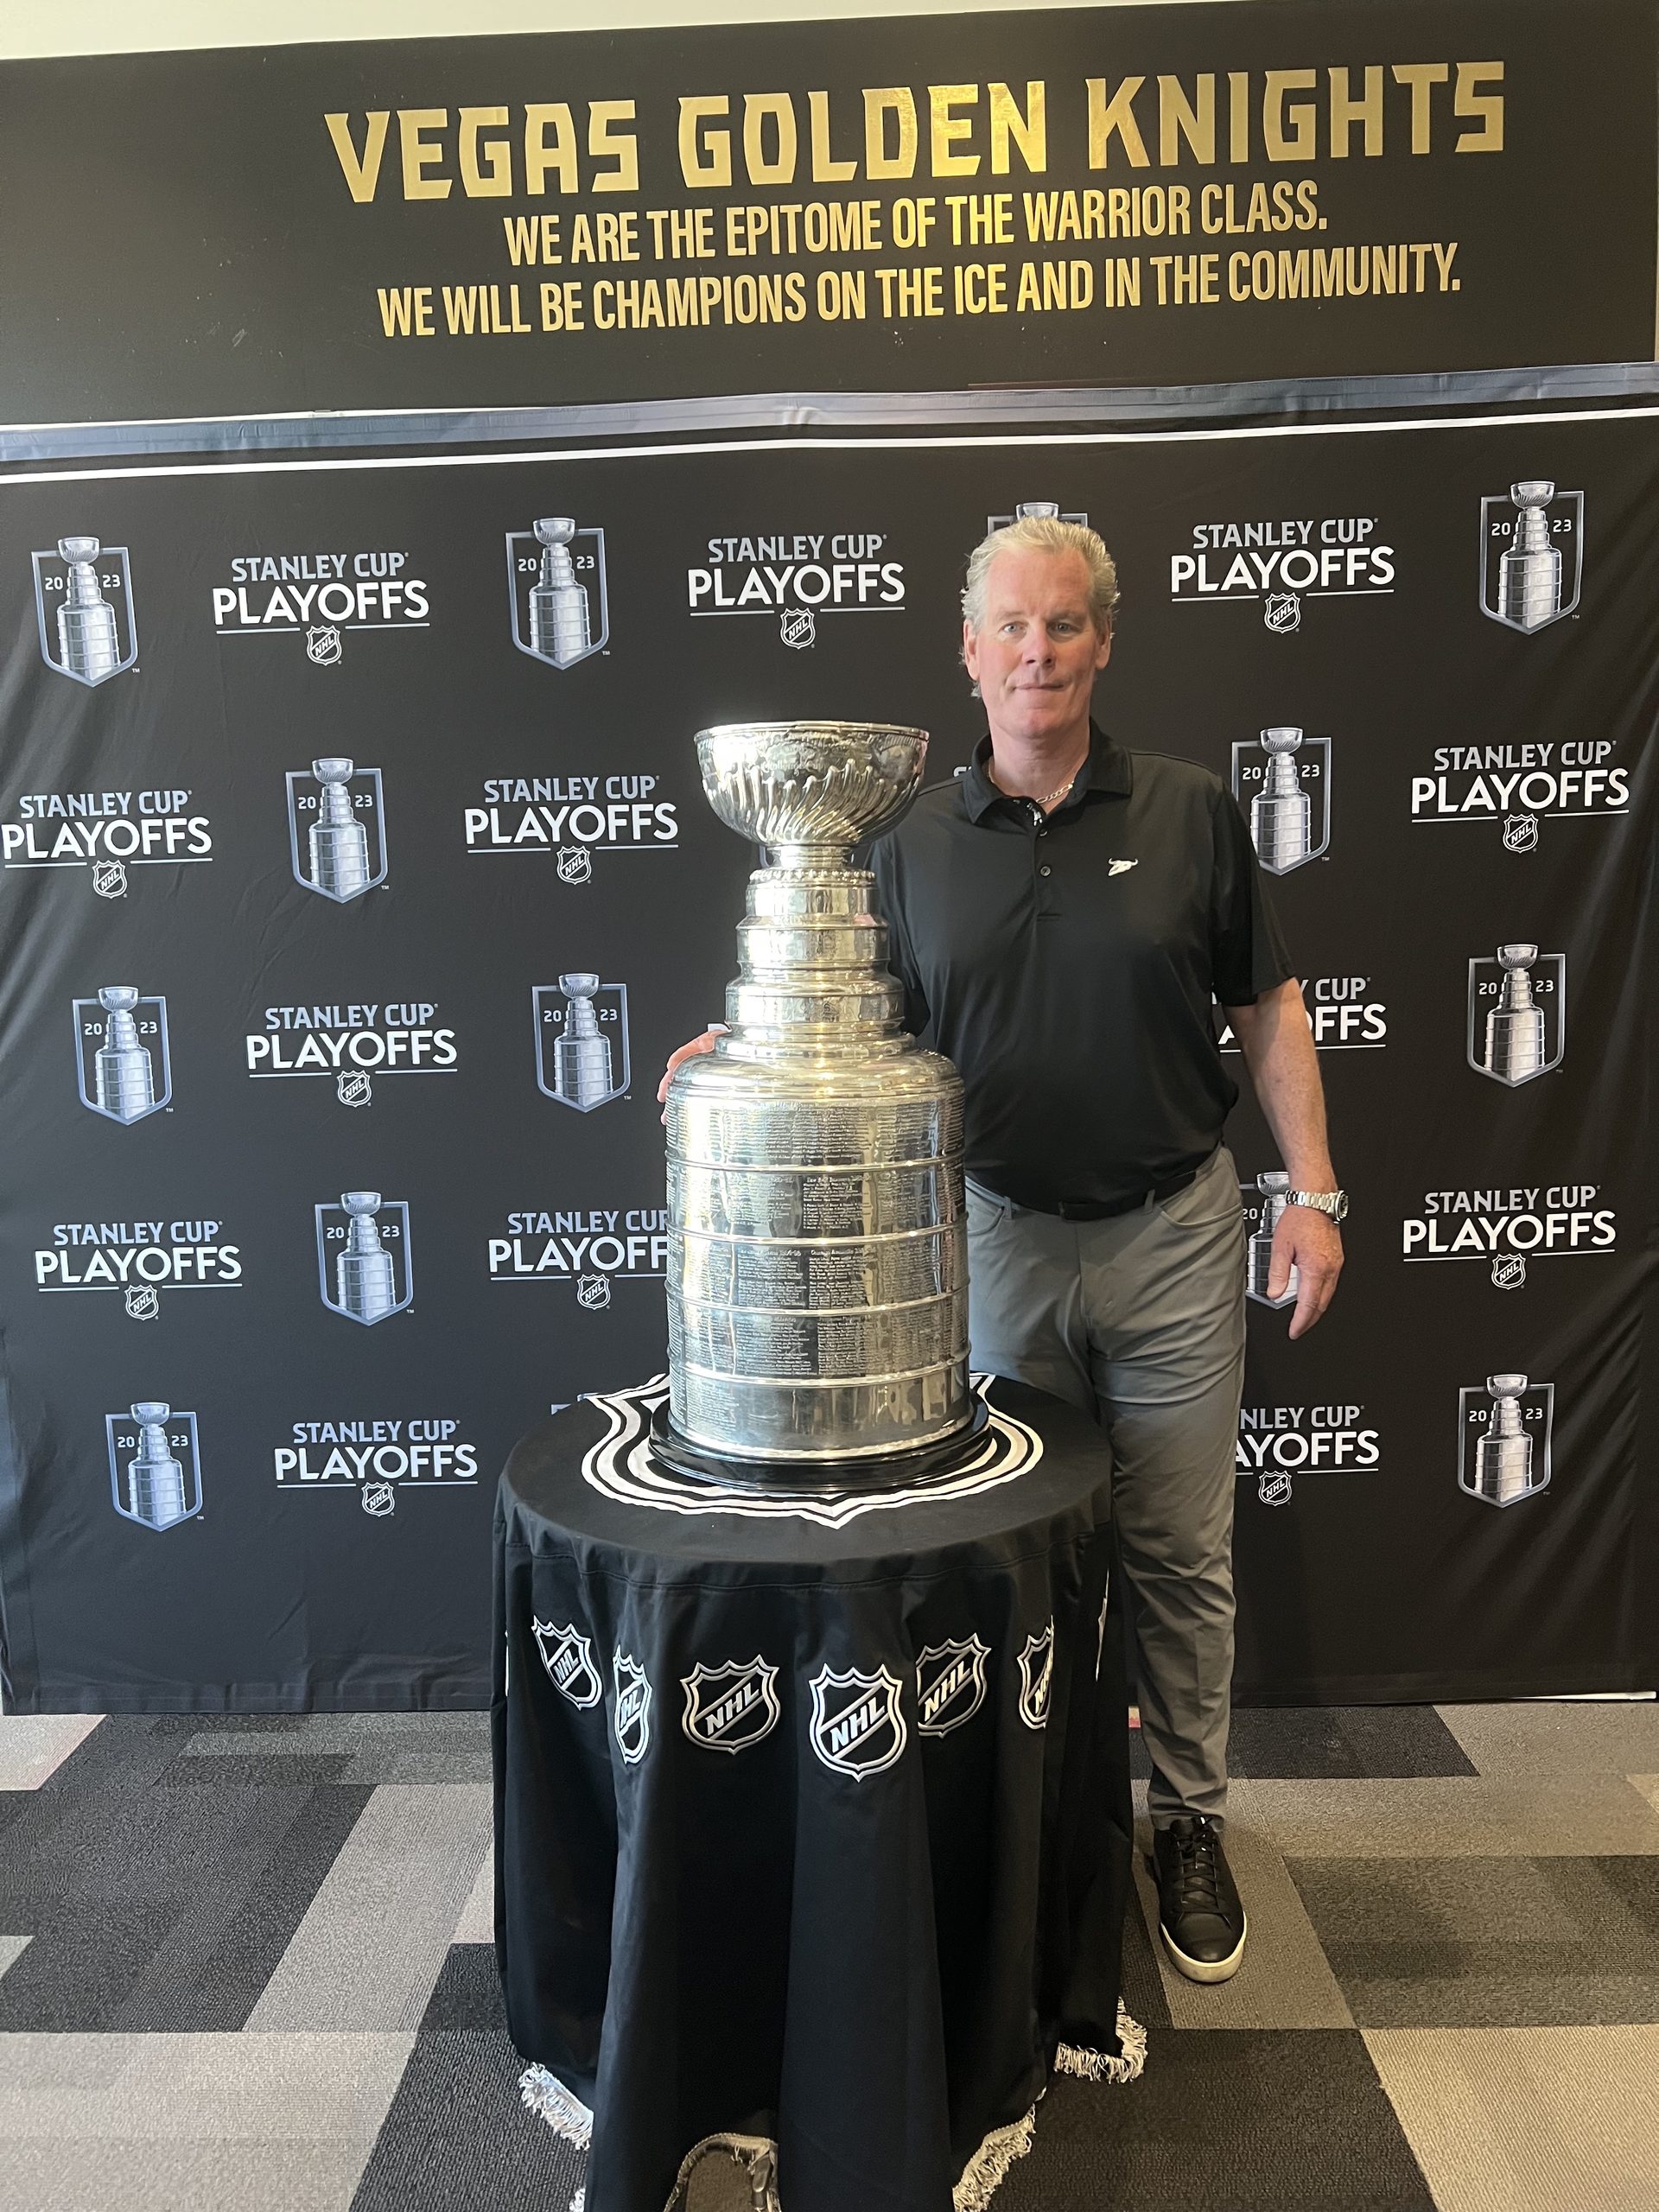 Kent with the Stanley Cup in Las Vegas